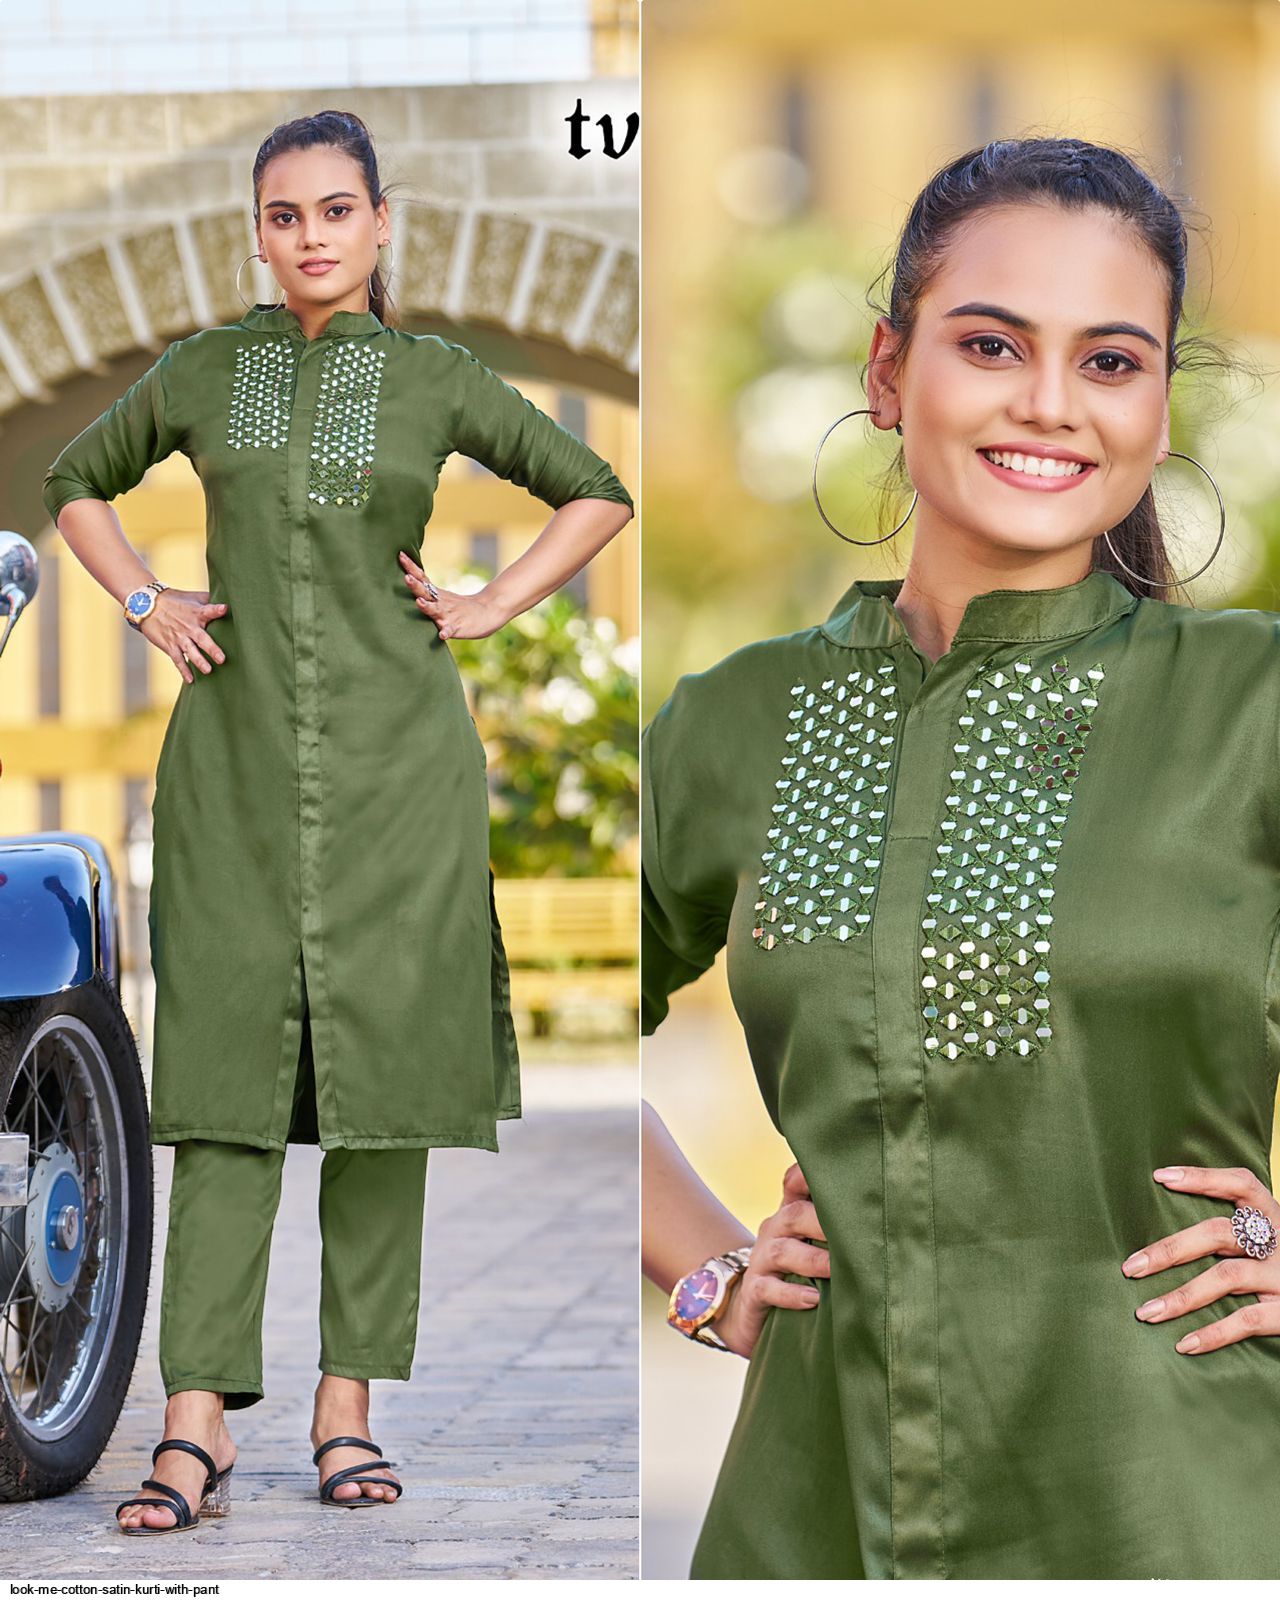 Rayon Long Sleeve Stylish Round Neck Printed Kurti And Pant Set in  Fatehabad-Haryana at best price by Dream Collection - Justdial